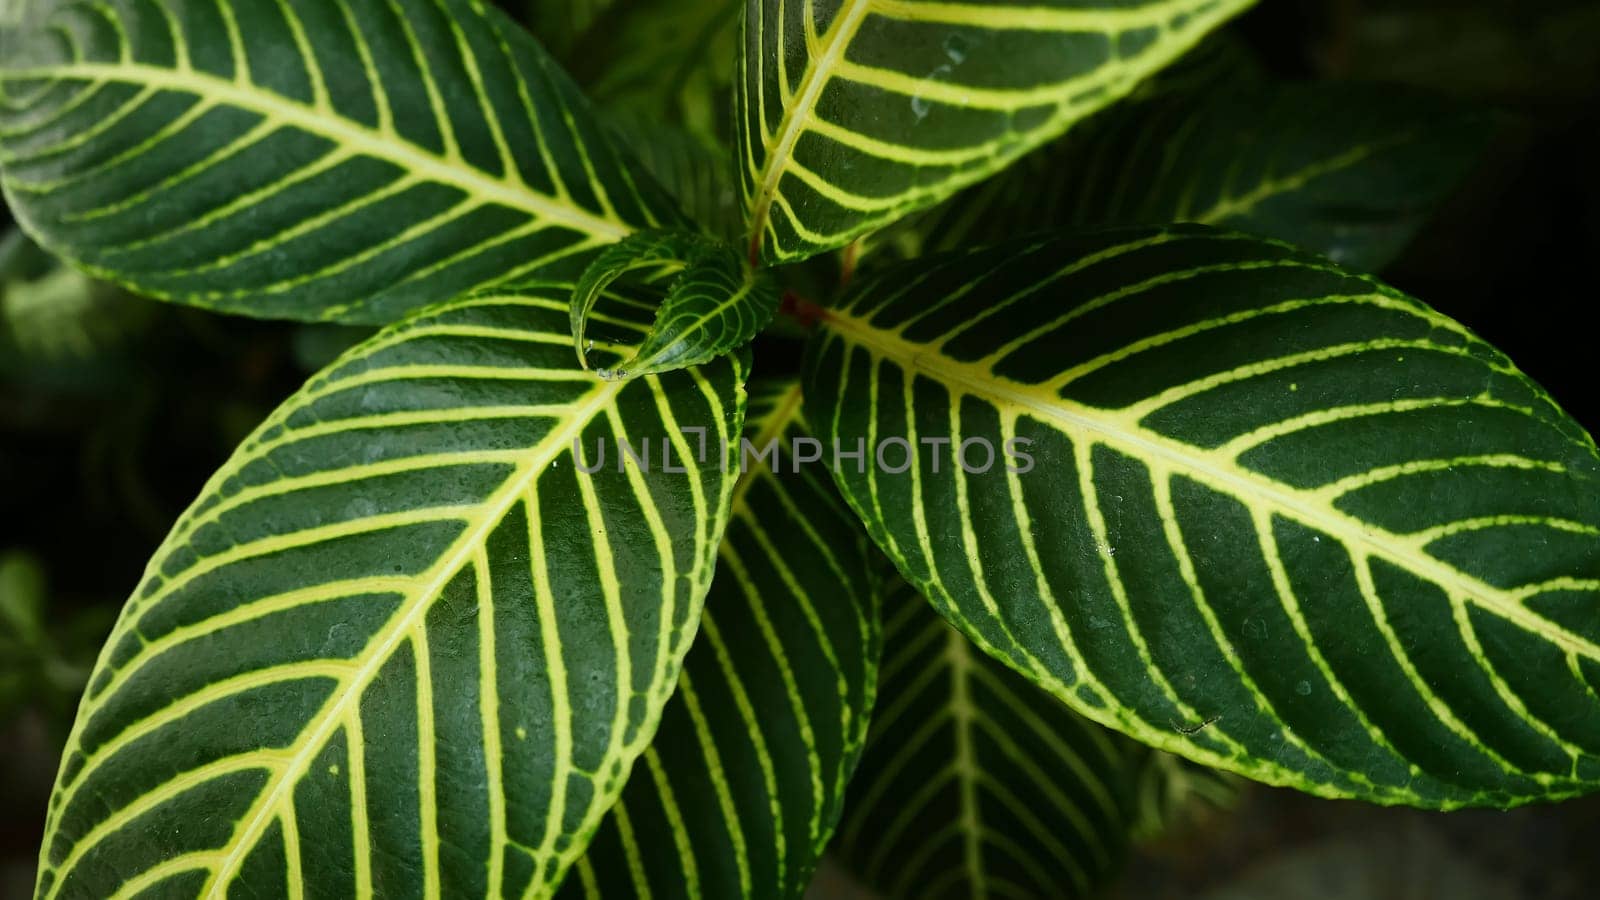 picture of leaves from a plant called Aphelandra squarrosa Nees, from the genus of Acanthaceae, or also known as Zebra Plant in garden and pots